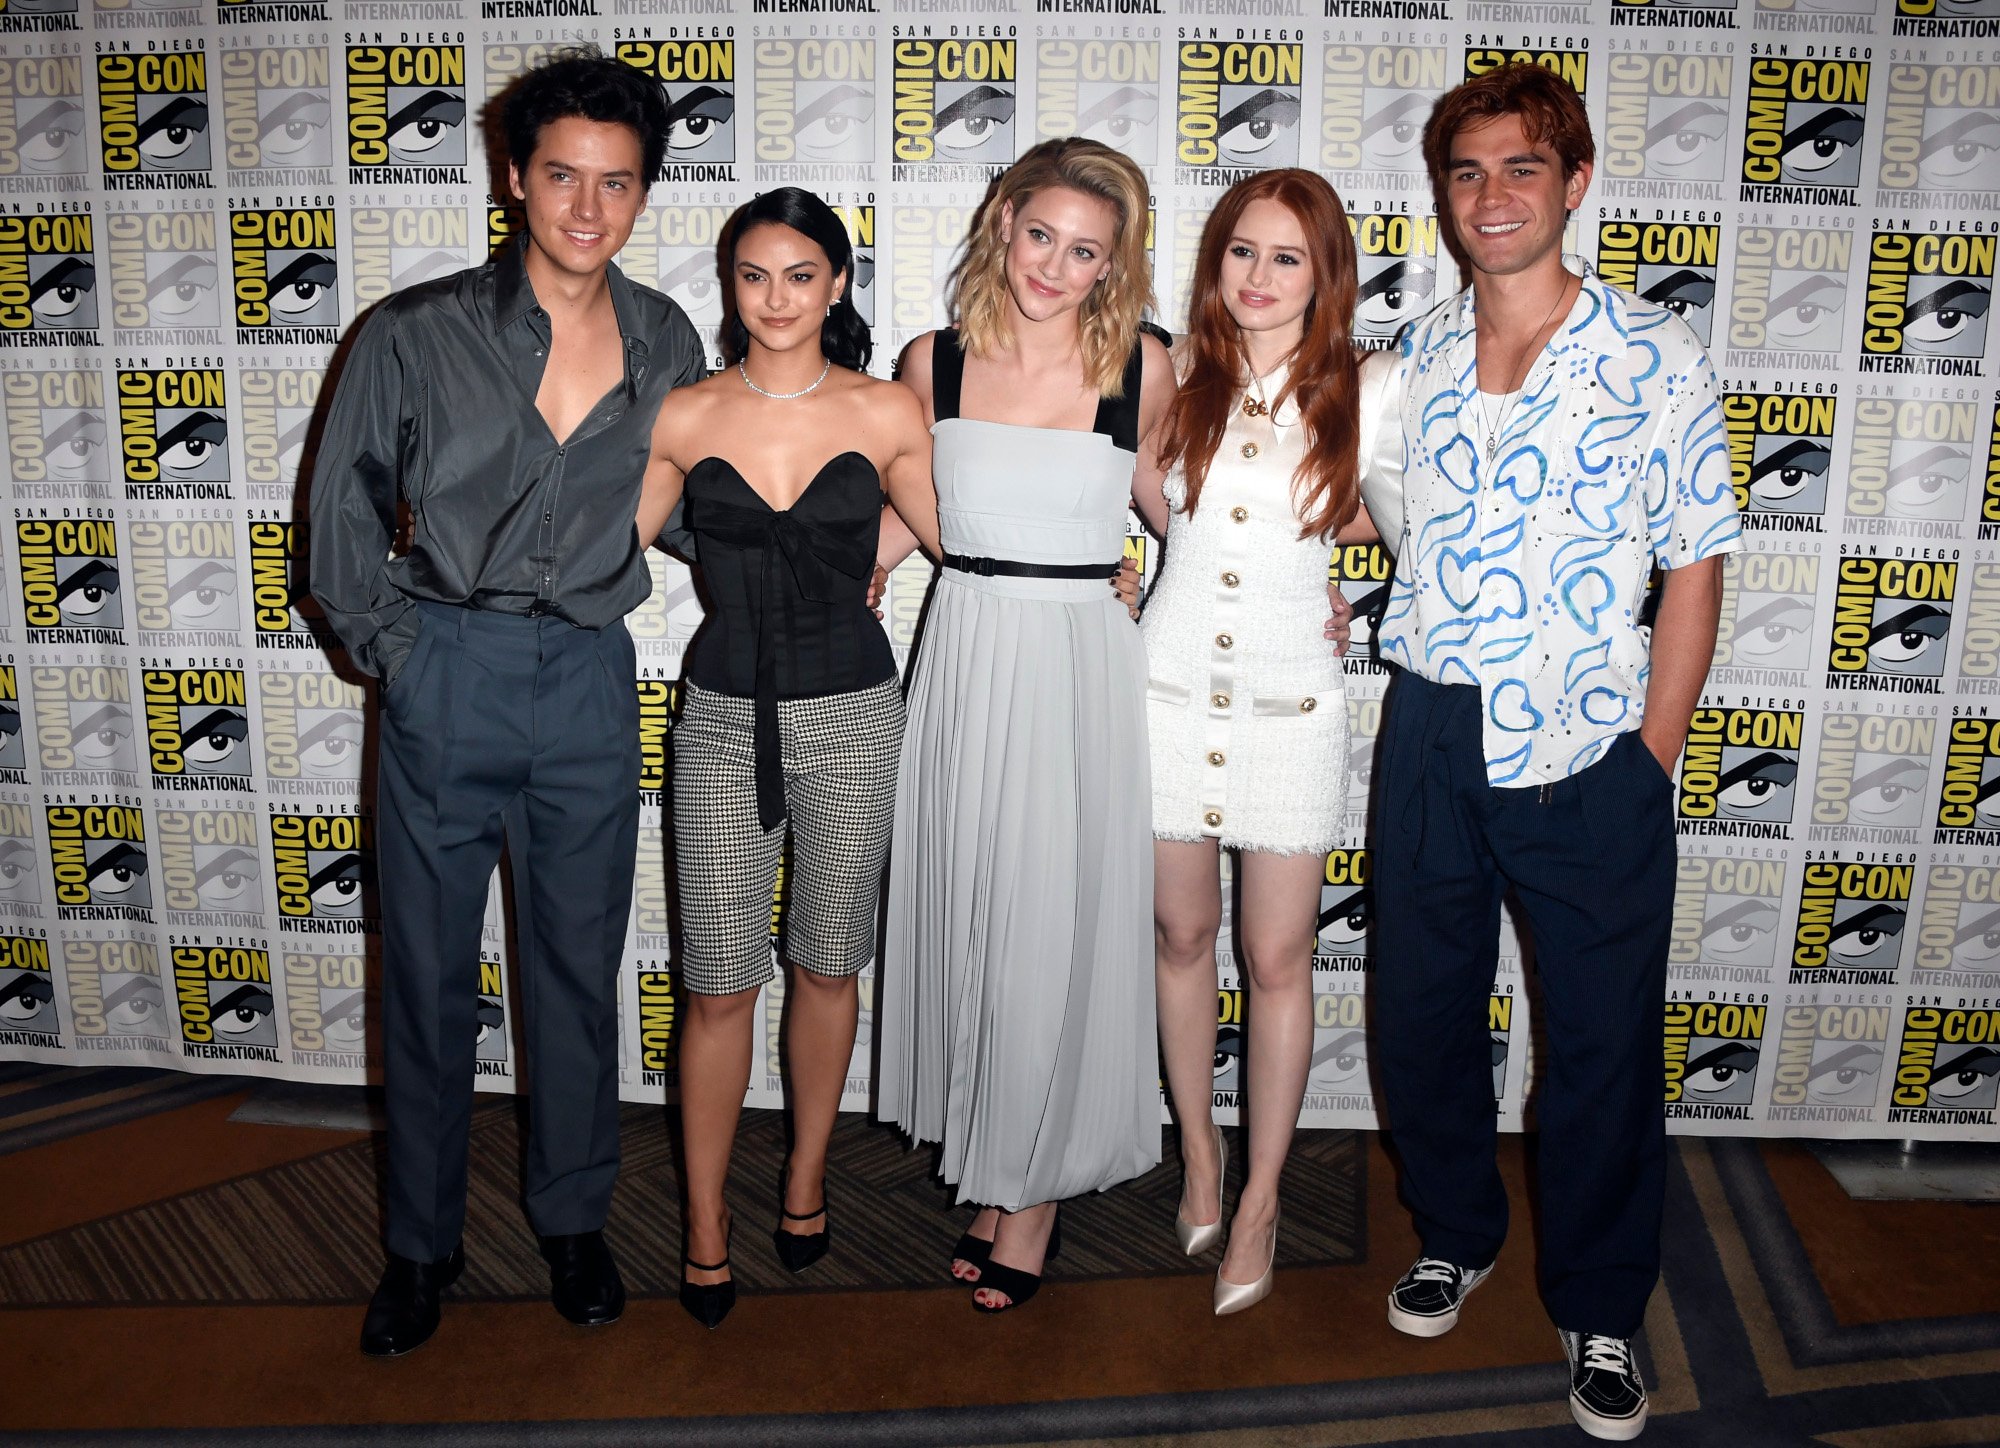 'Riverdale' Season 5 stars Cole Sprouse, Camila Mendes, Lili Reinhart, Madelaine Petsch, and K.J. Apa. They're standing side by side in front of a Comic-Con wall and wearing clothes that mix casual and formal styles.